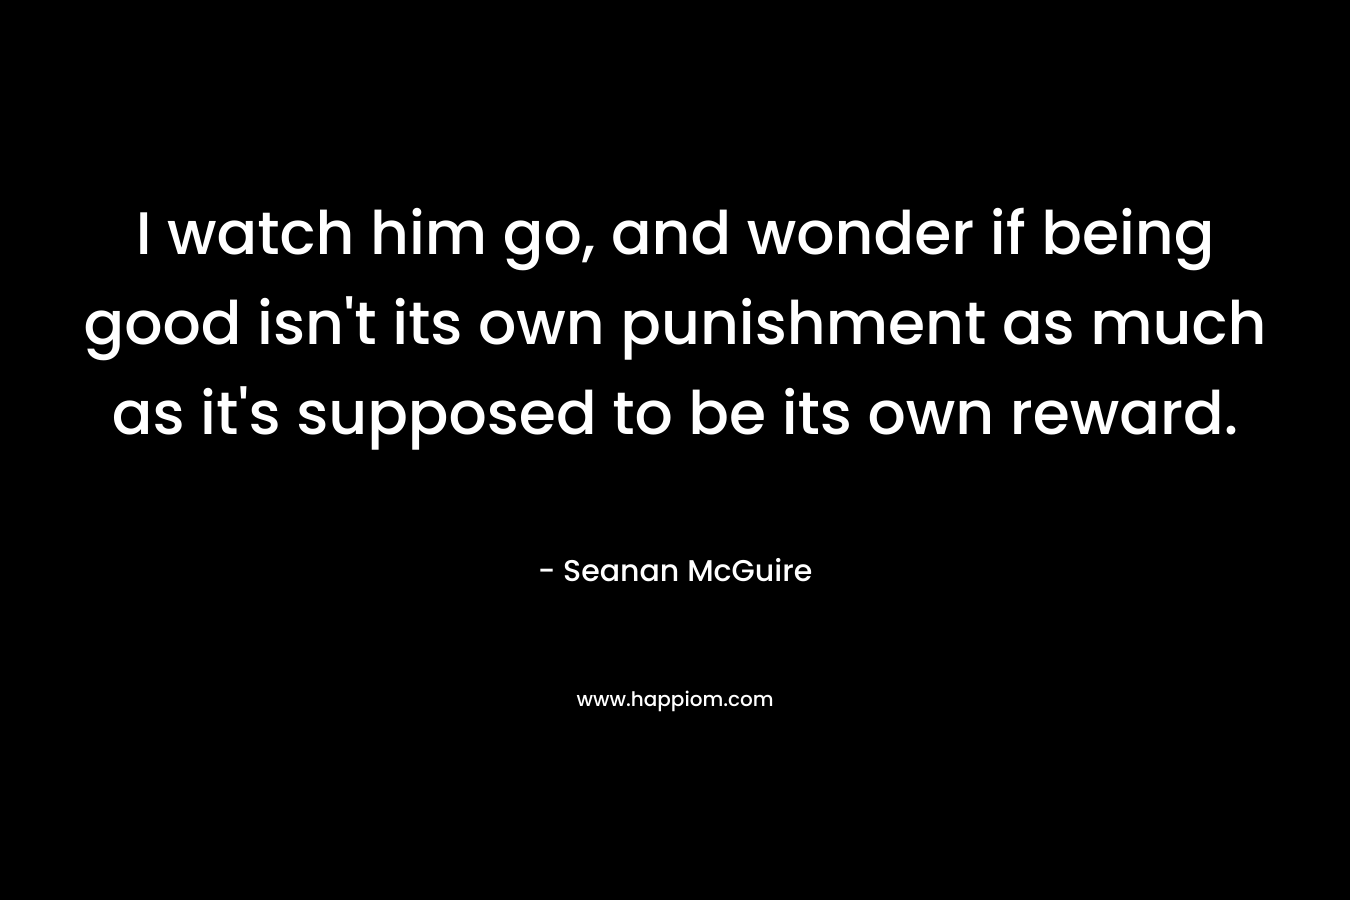 I watch him go, and wonder if being good isn’t its own punishment as much as it’s supposed to be its own reward. – Seanan McGuire